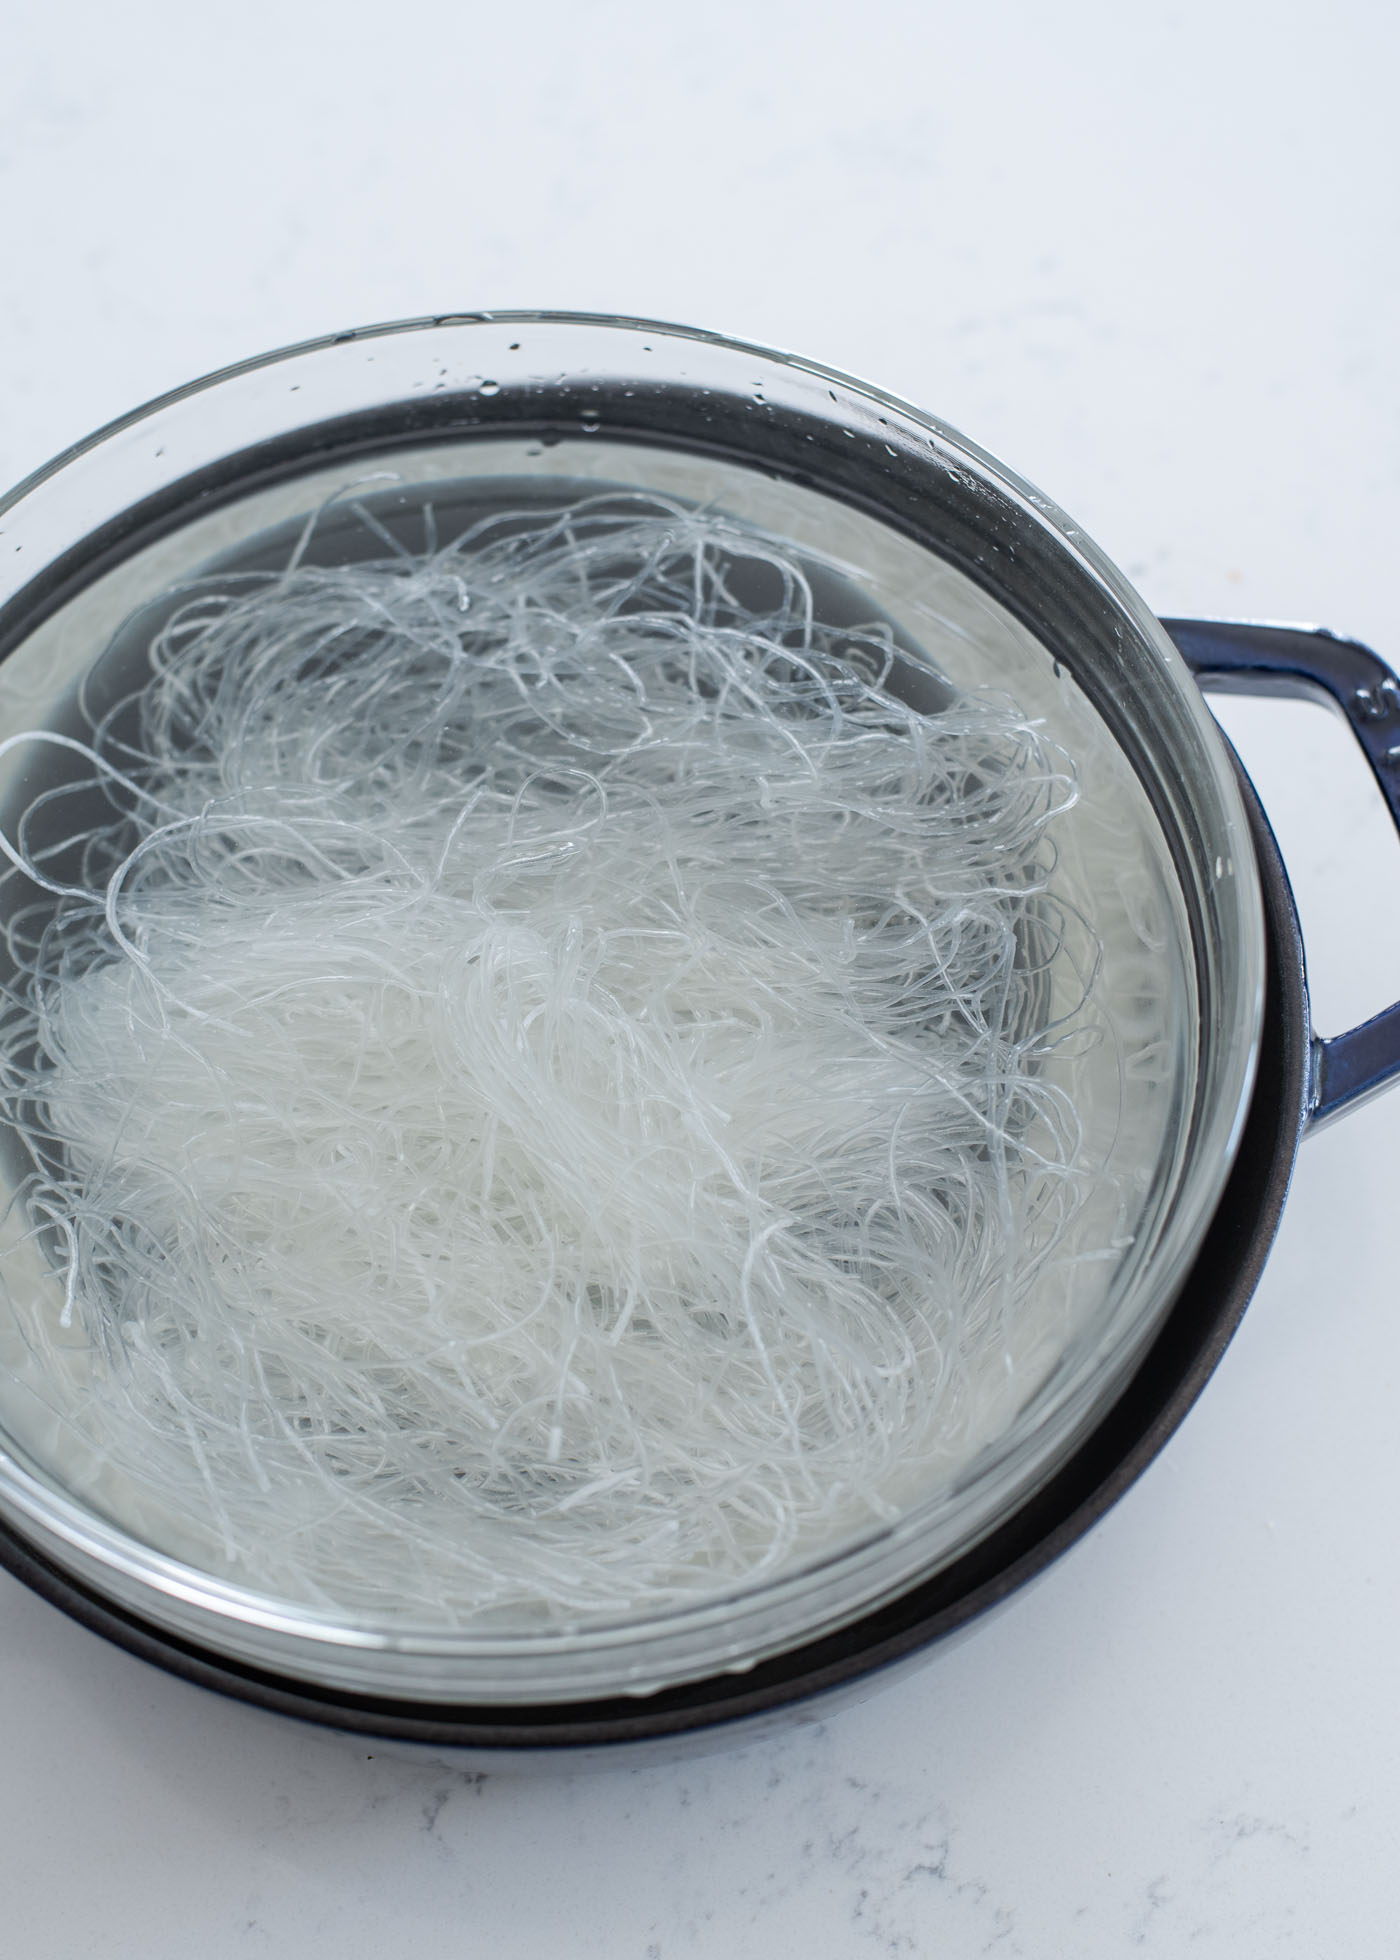 Glass noodles are soaking in the water in bowl.